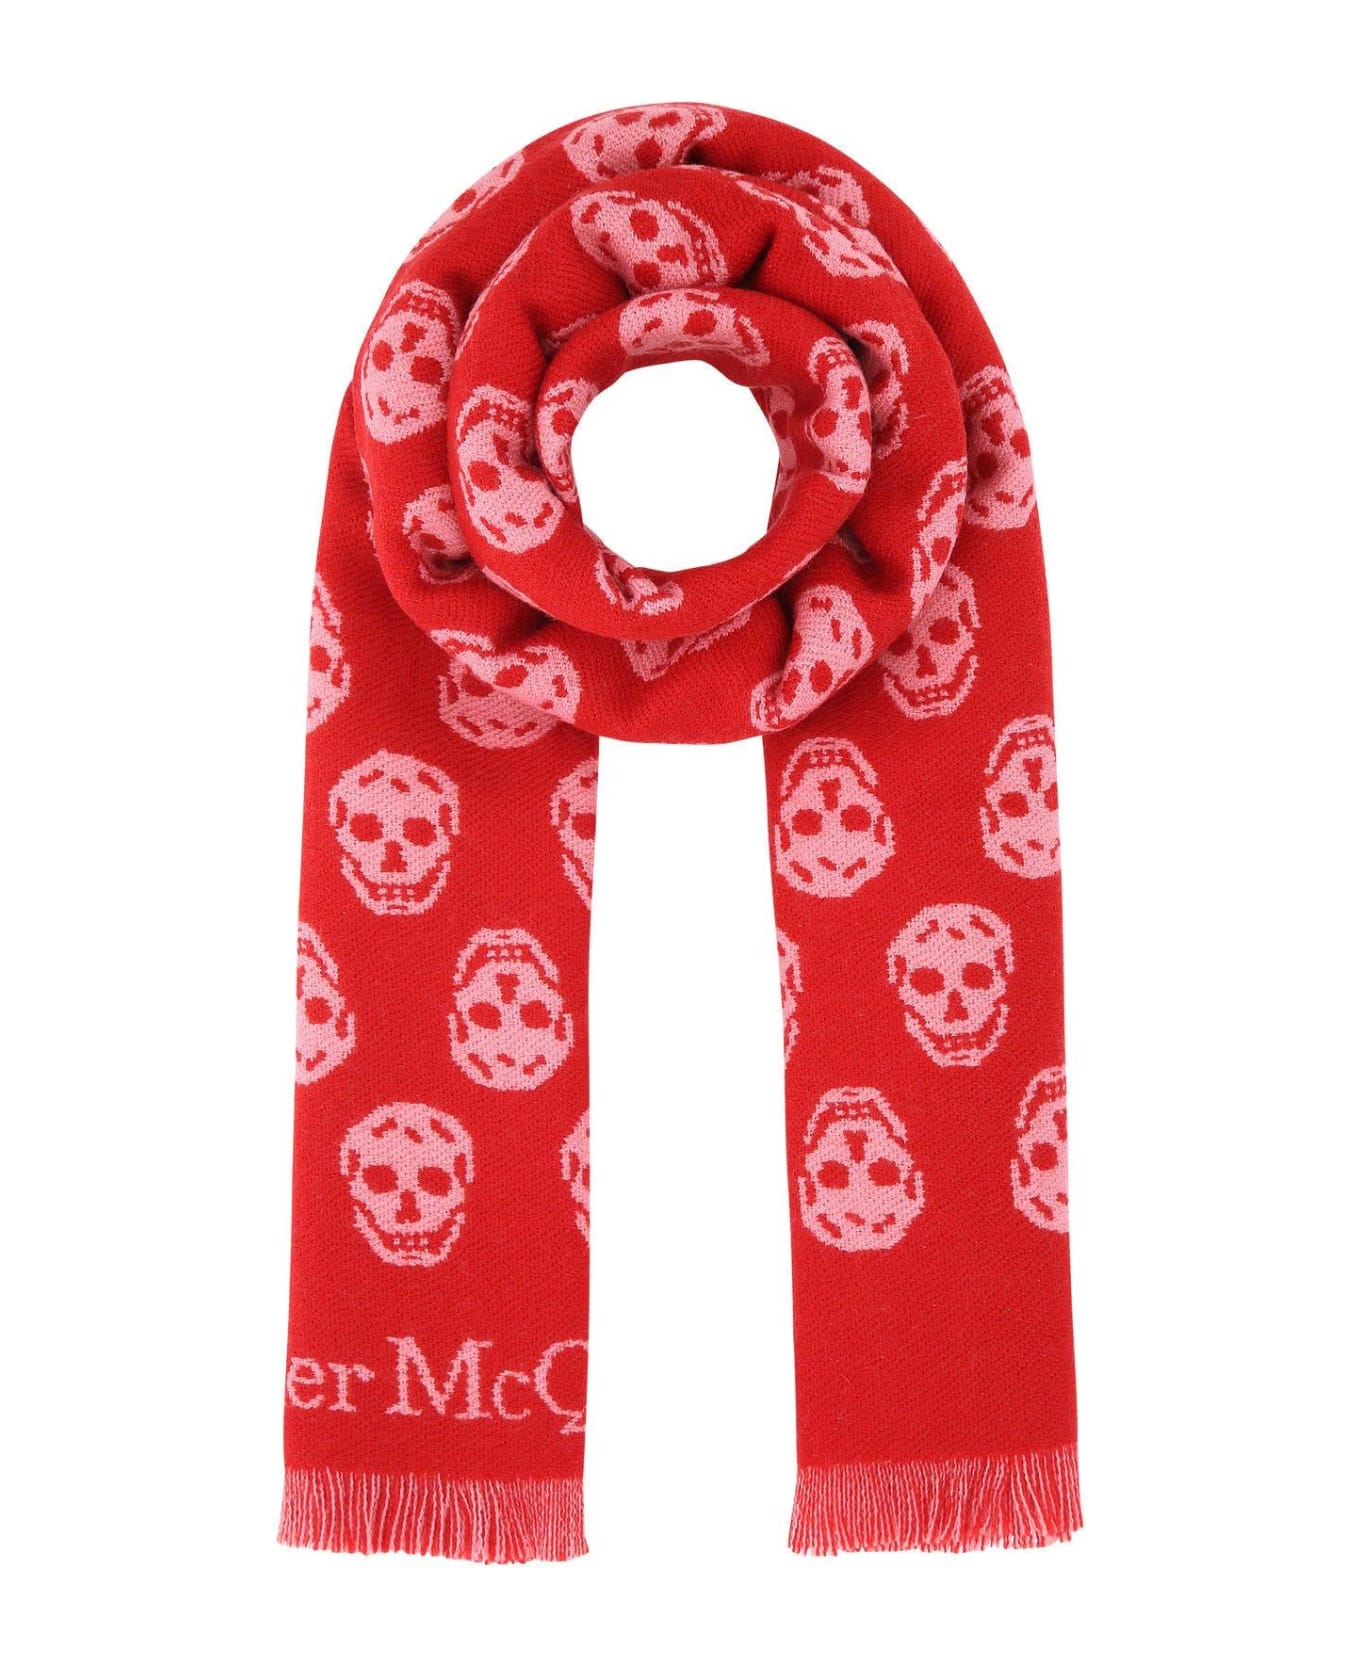 Alexander McQueen Embroidered Wool Scarf - Rosso